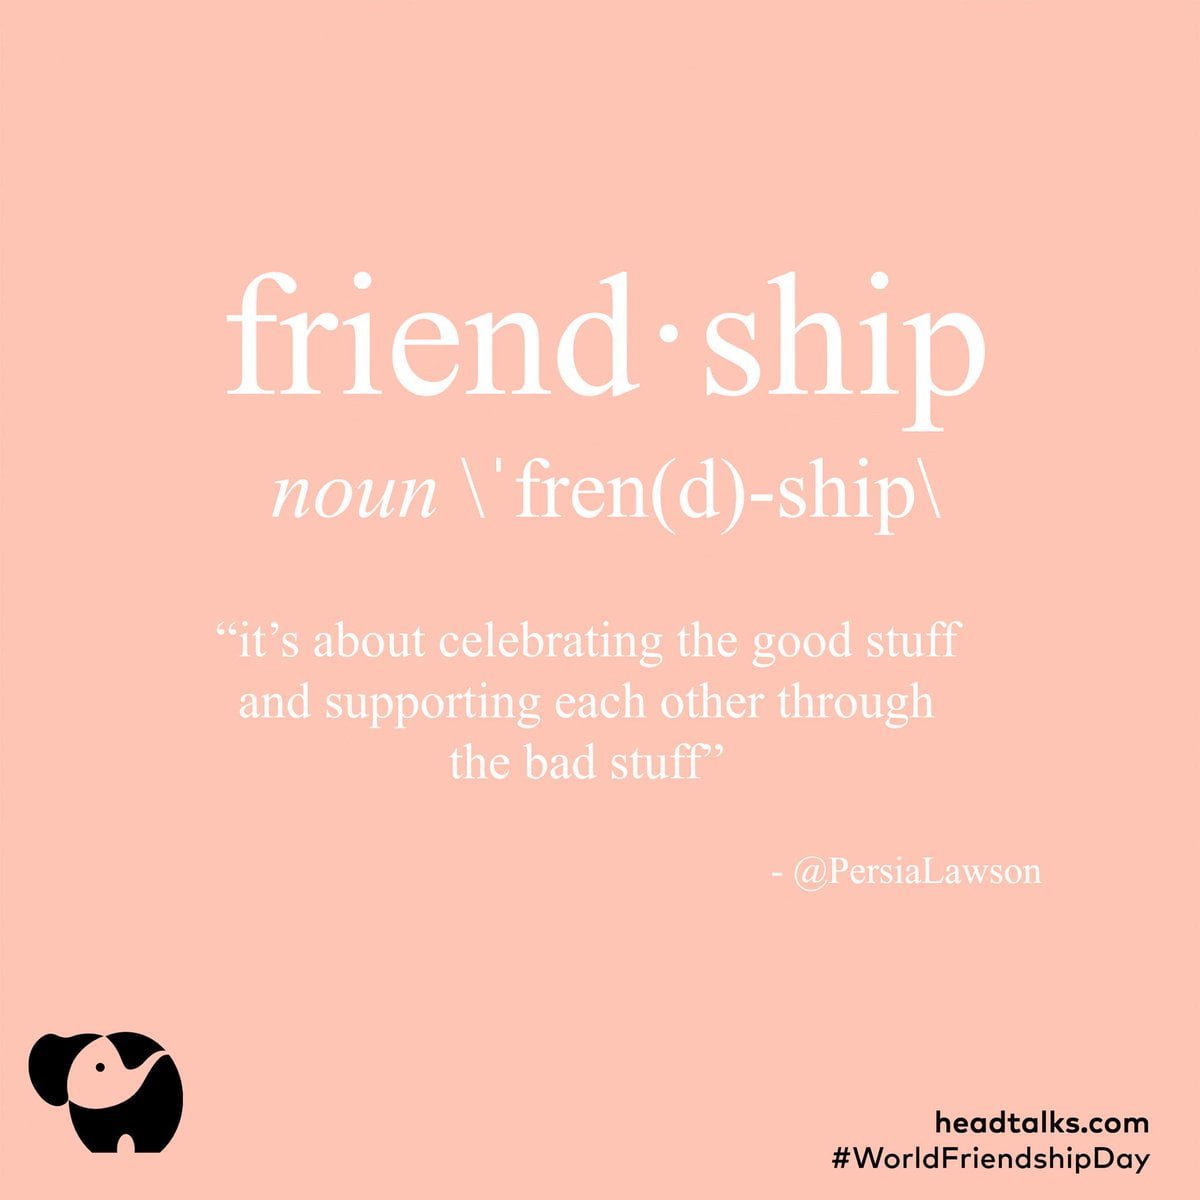 What Does Ship Mean in Friendship